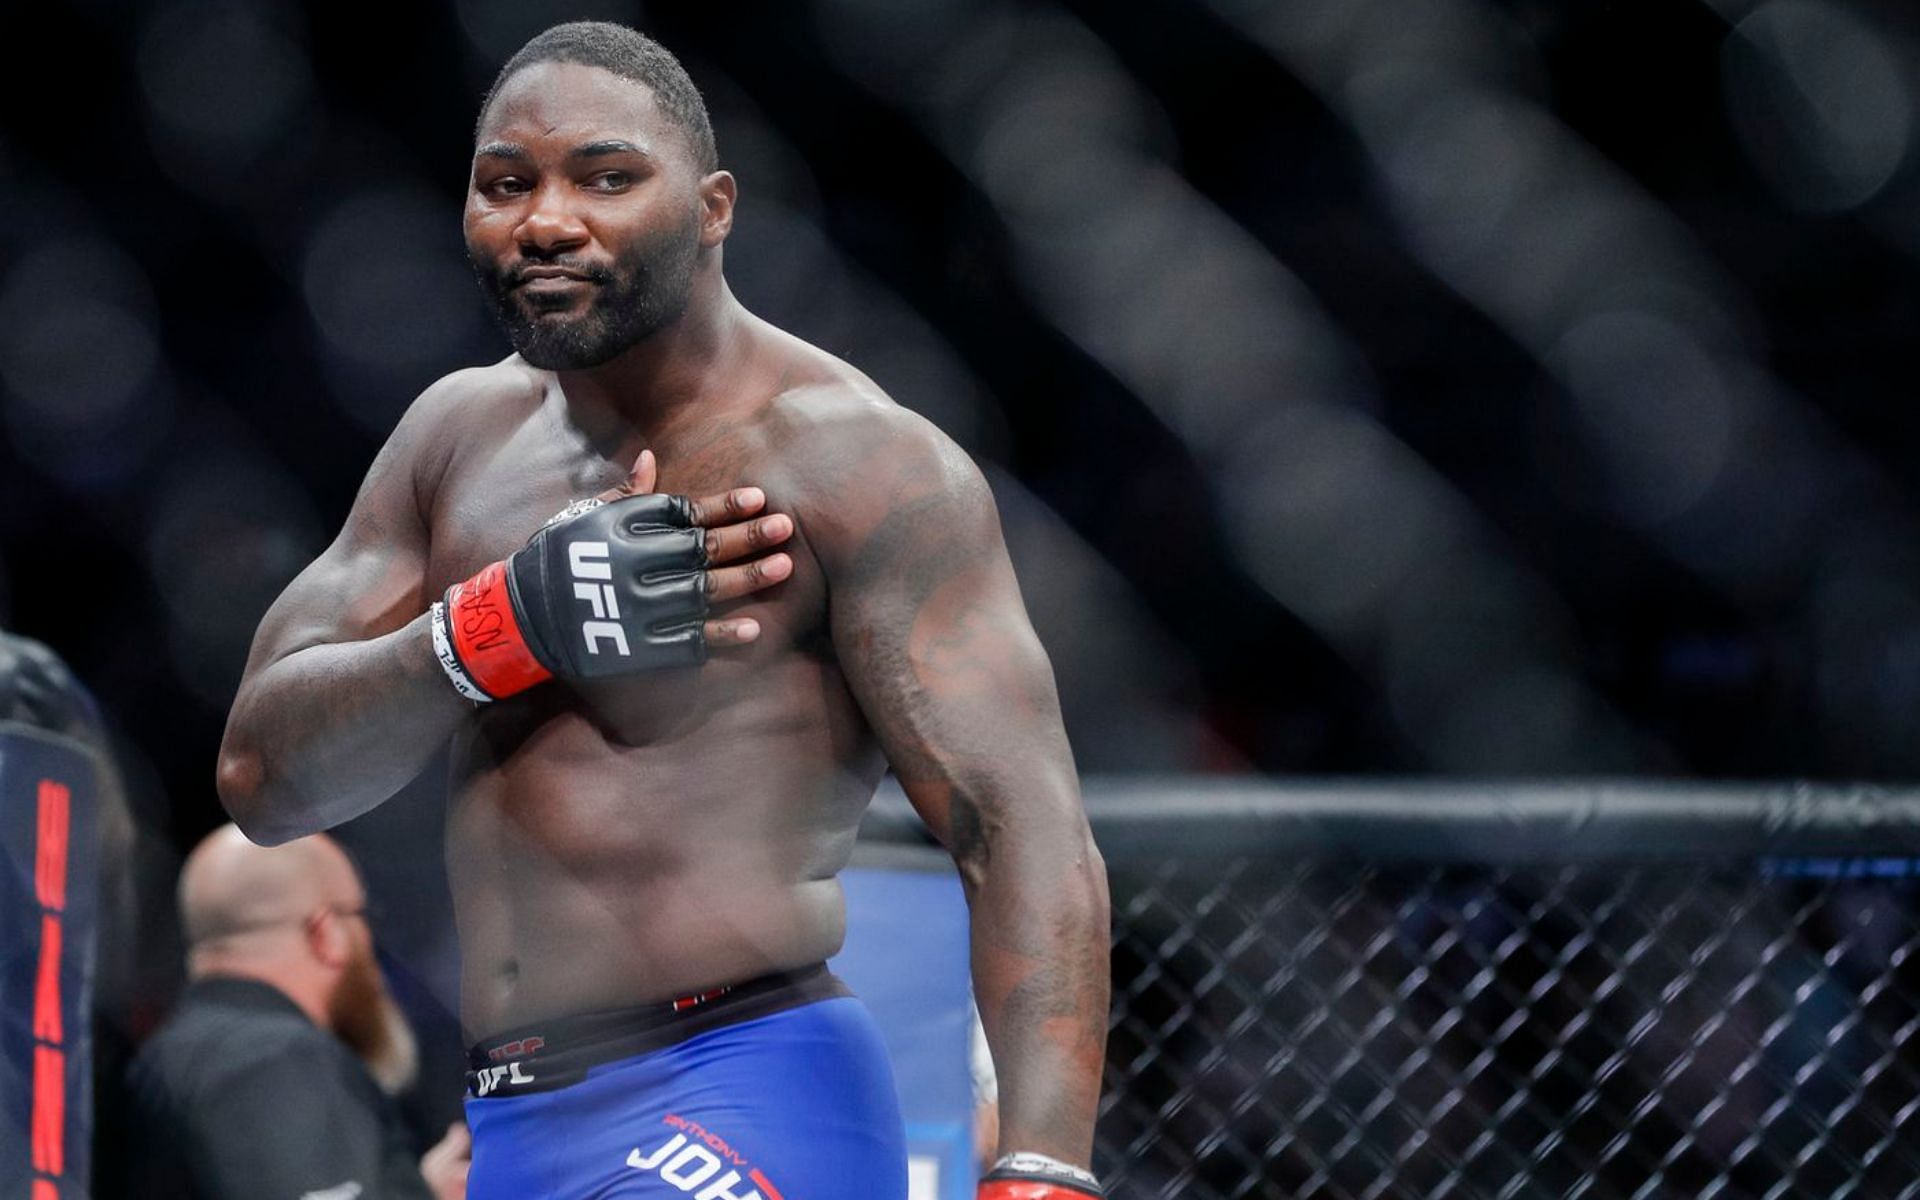 The MMA world has been left stunned by the death of former light-heavyweight title challenger Anthony Johnson